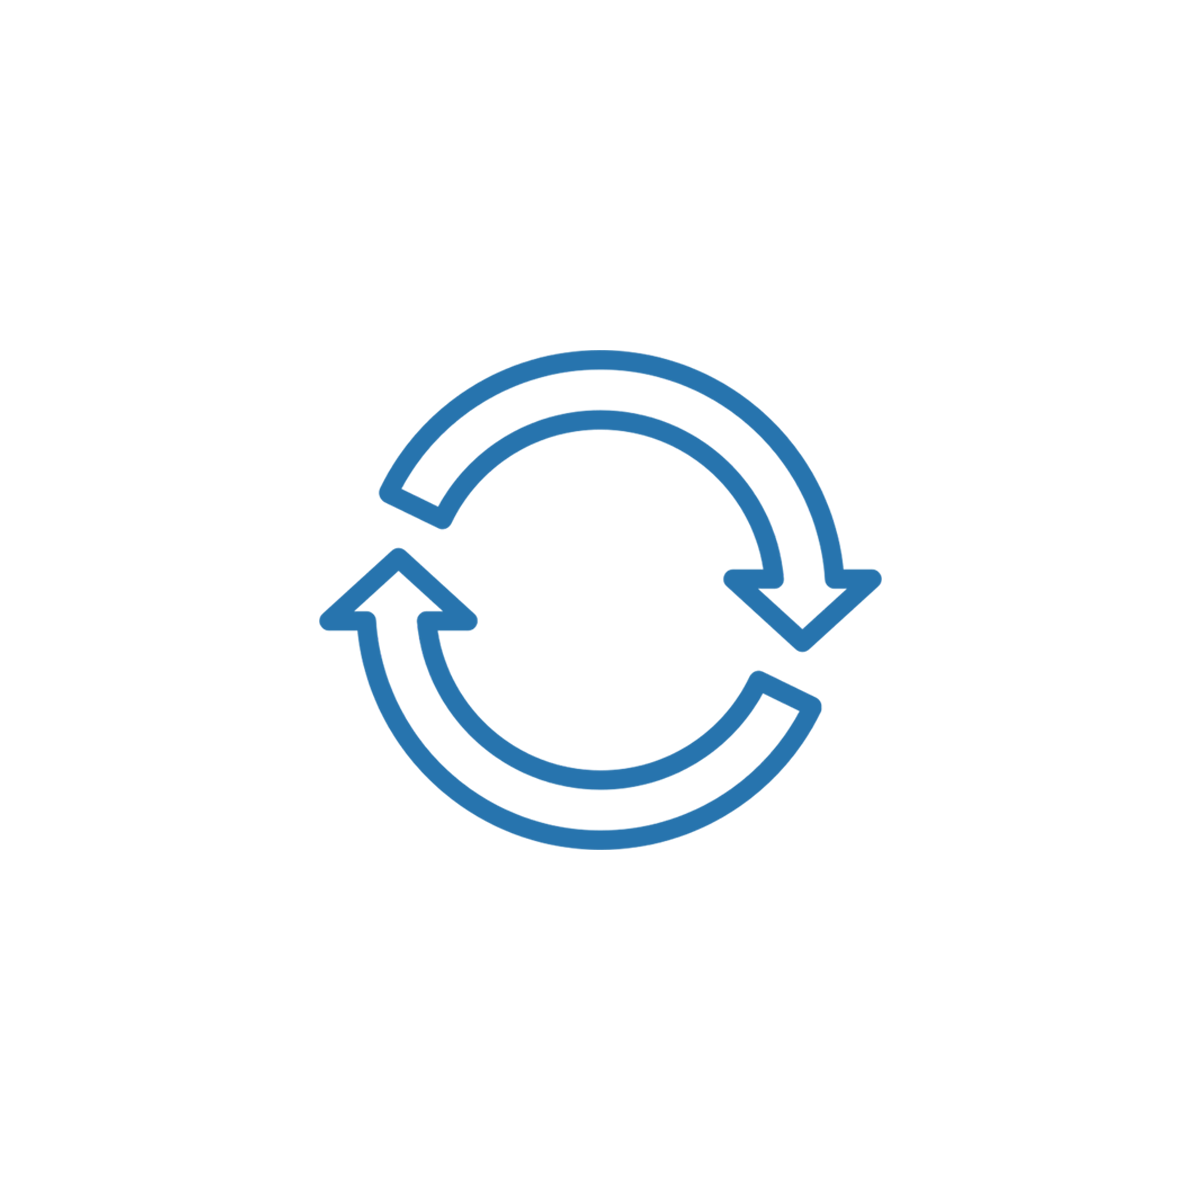 Two arrows form a circle, representing a cycle.